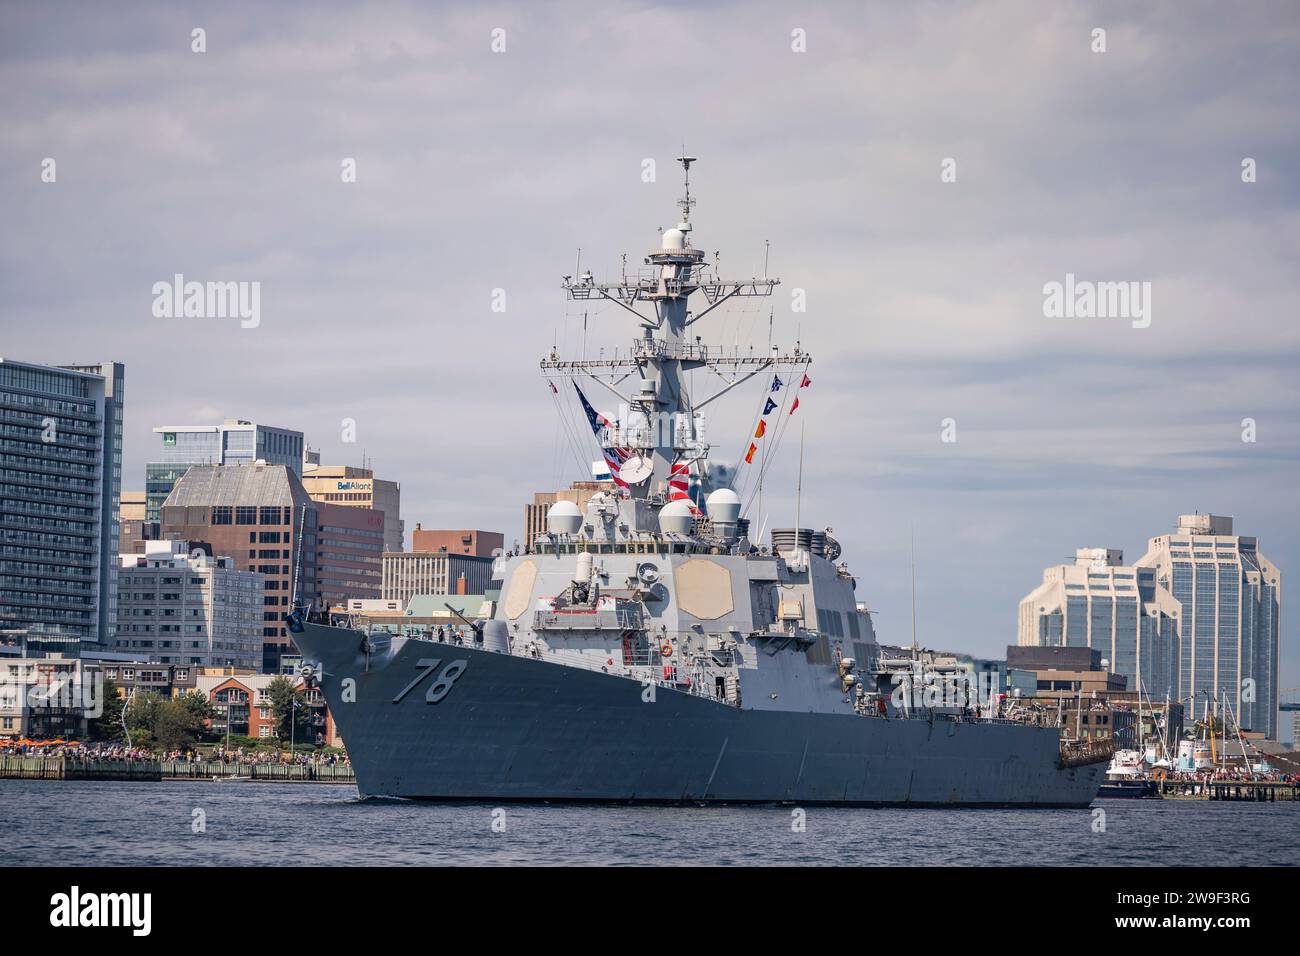 US Navy destroyer USS Porter participating in the sailpast at the end of Fleet Week in Halifax, Nova Scotia, Canada. Stock Photo